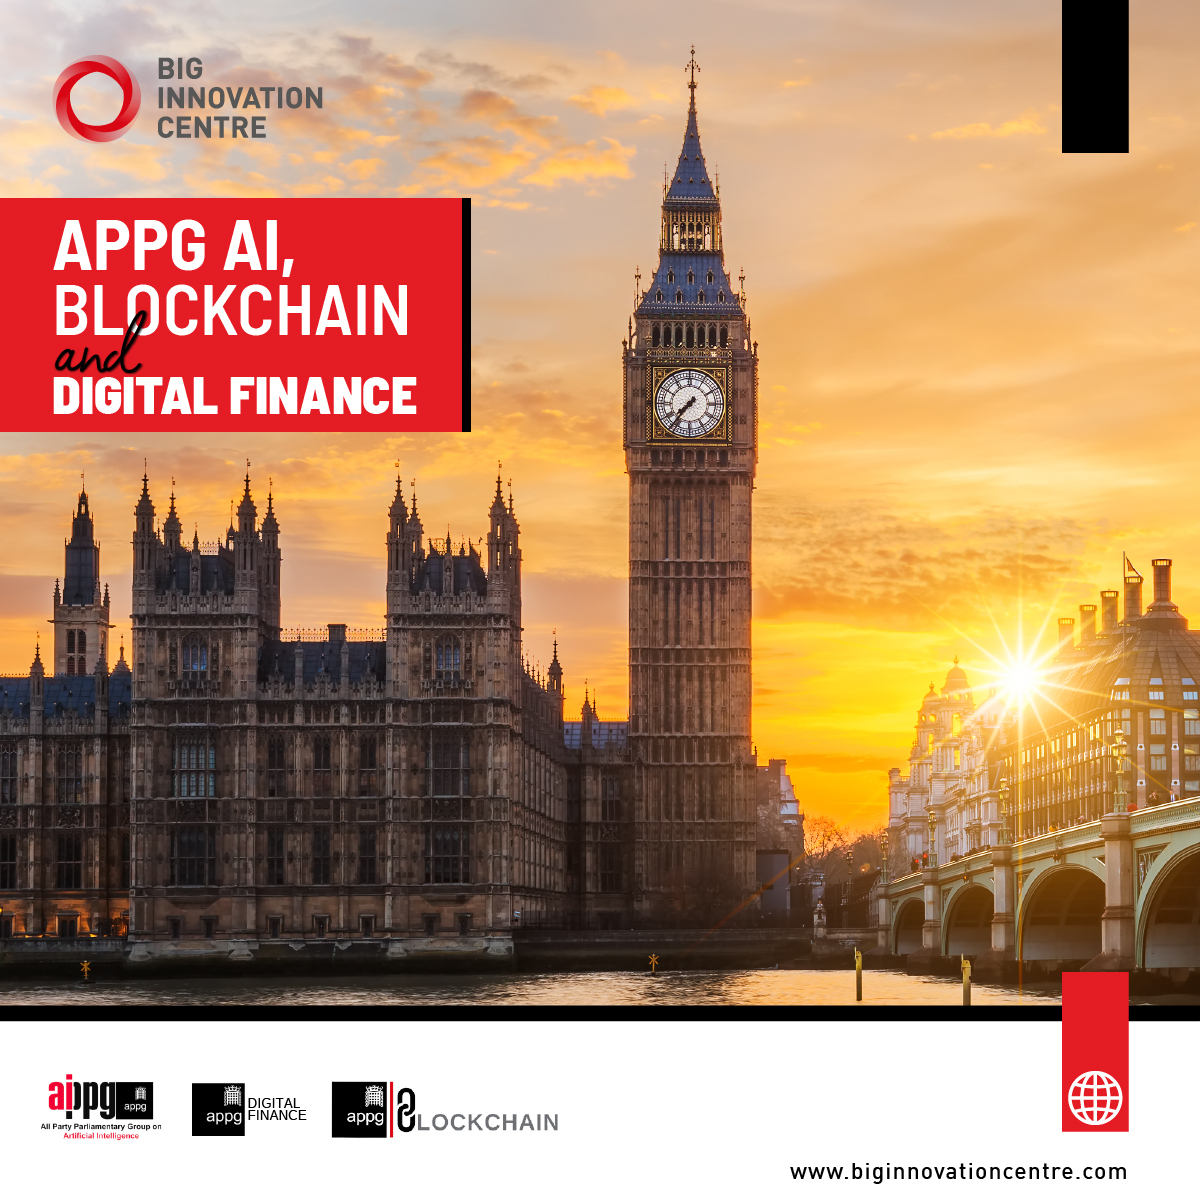 📷 Join the #APPGs on #AI, #Blockchain & #DigitalFinance, led by #ProfessorBirgitteAndersen. Collaborate with policymakers & experts to shape the UK's digital landscape. Be part of the change! 📷 #UKParliament #BigInnovationCentre #JoinUs